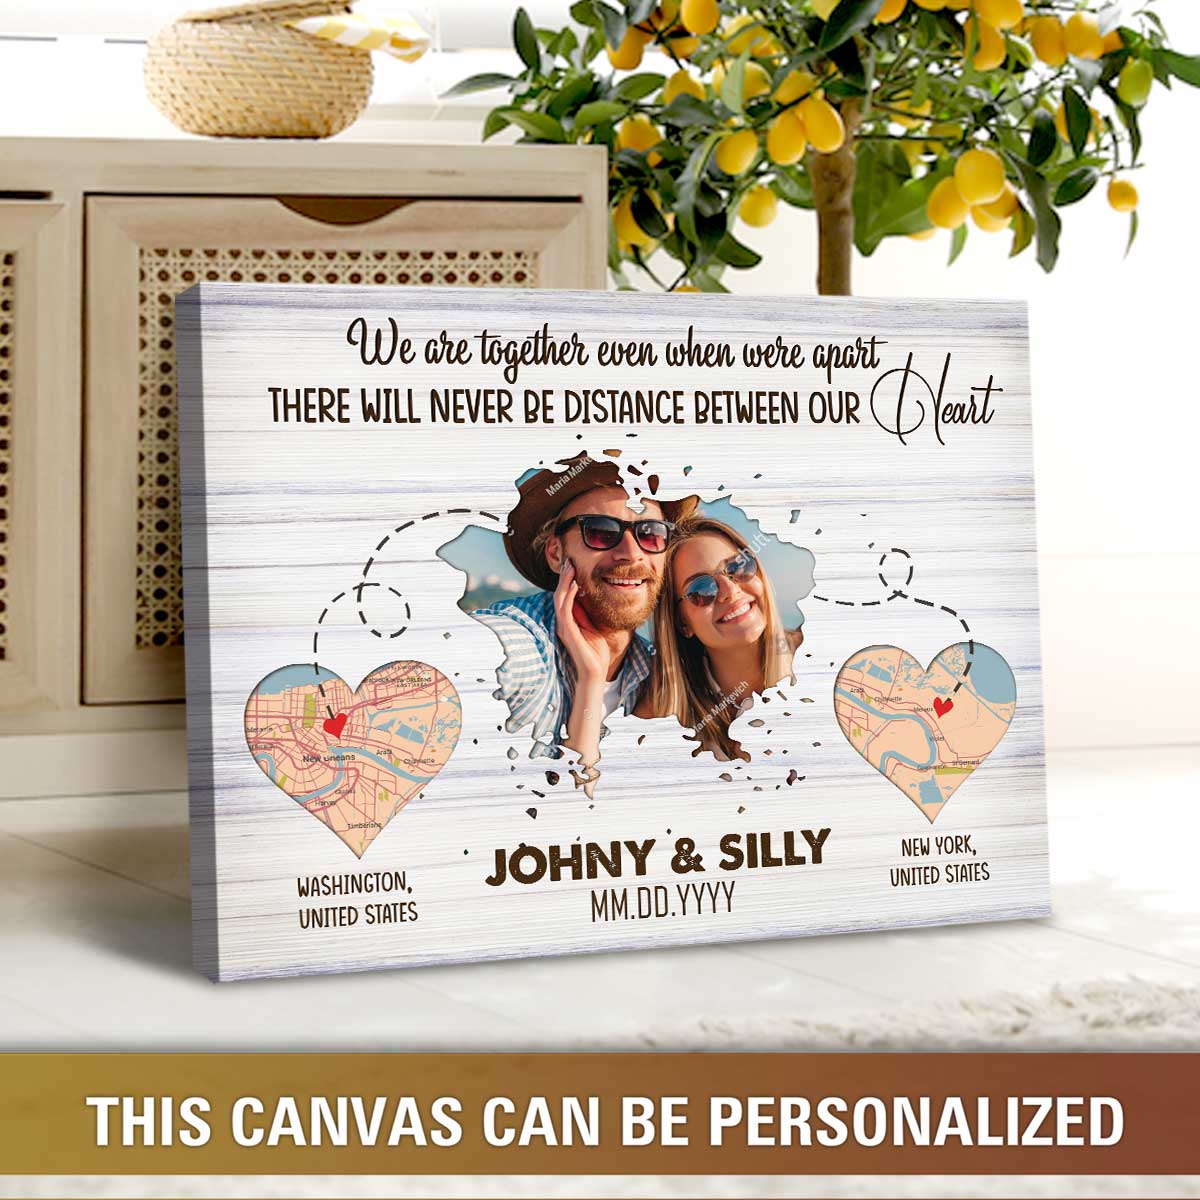 Personalized Fiance Gift For Him Boyfriend Anniversary Gifts